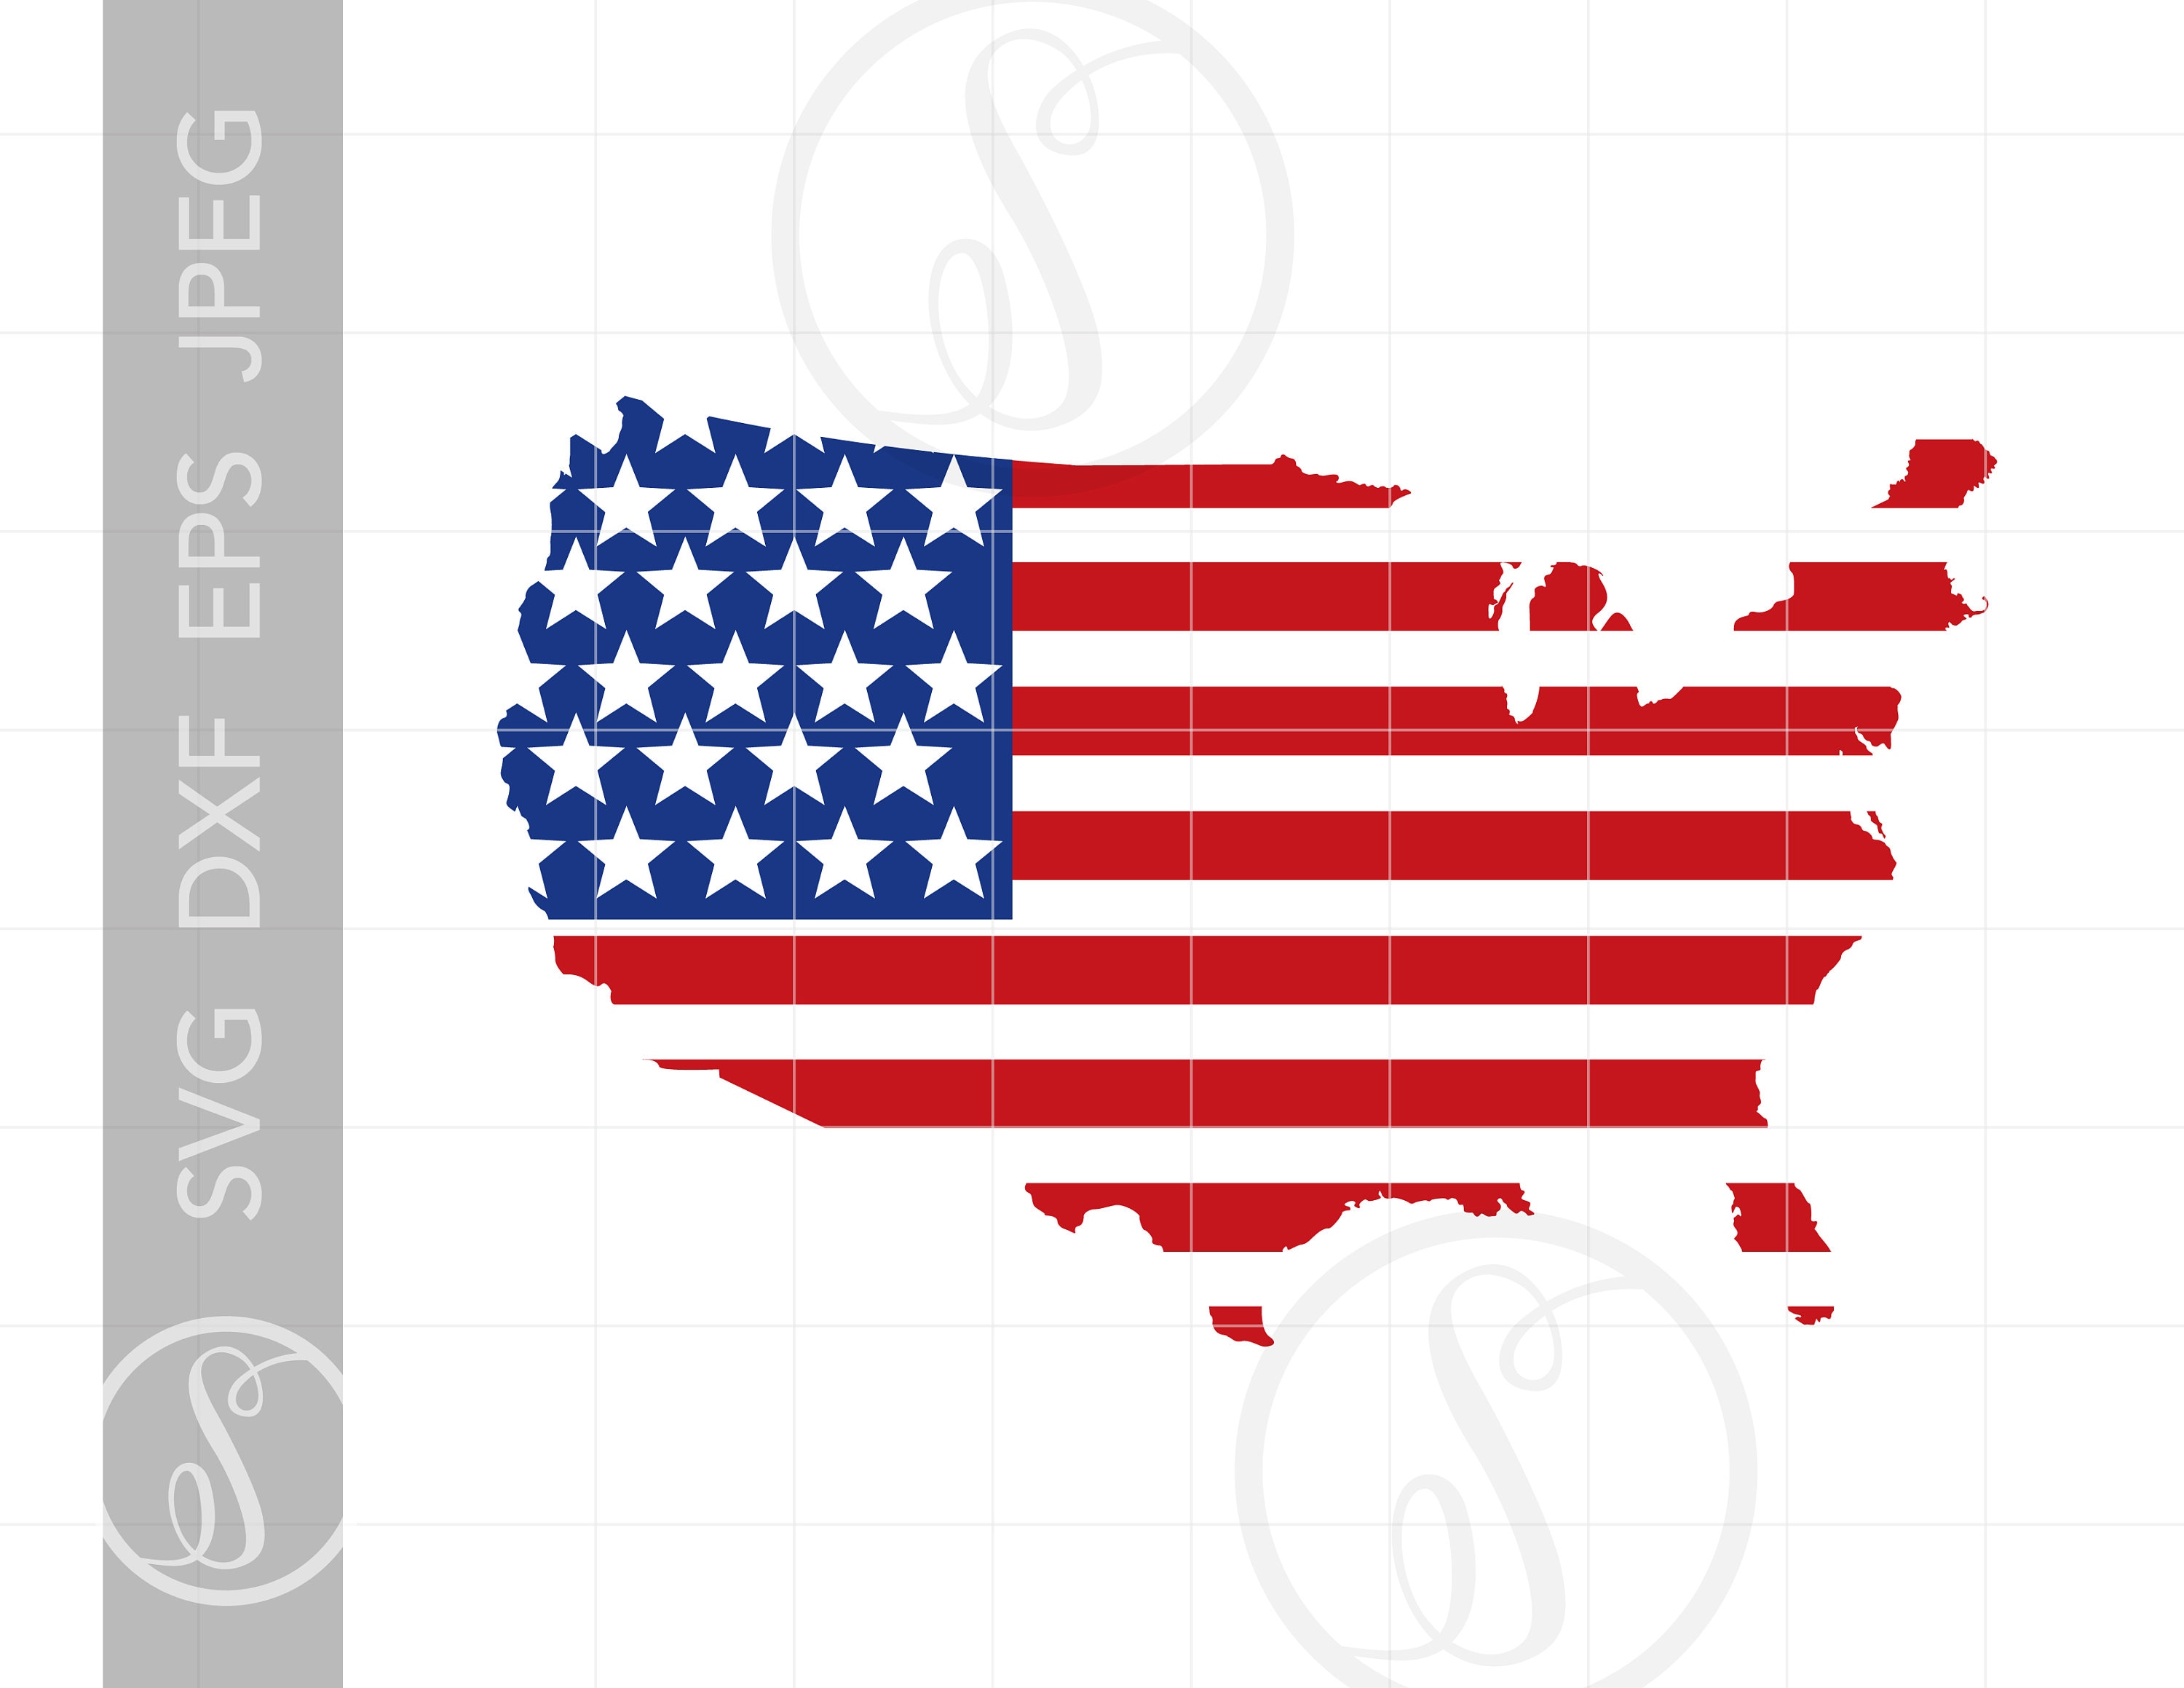 United States Outline Shape American Flag Graphic, USA Silhouette